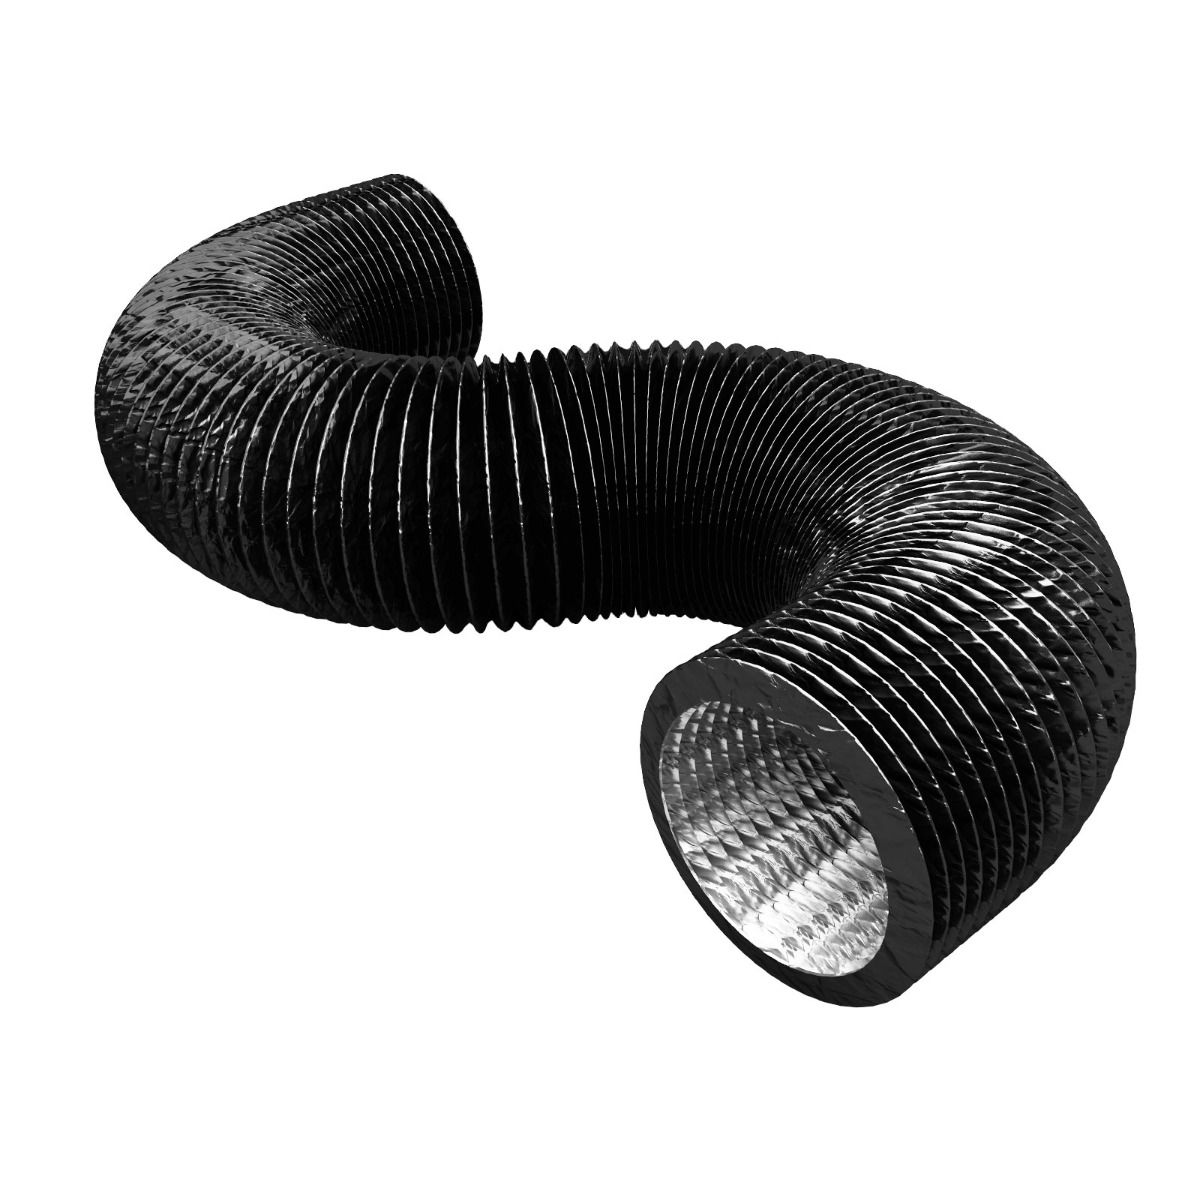 Mars Hydro 6-inch 25-foot Flexible Ventilation Duct